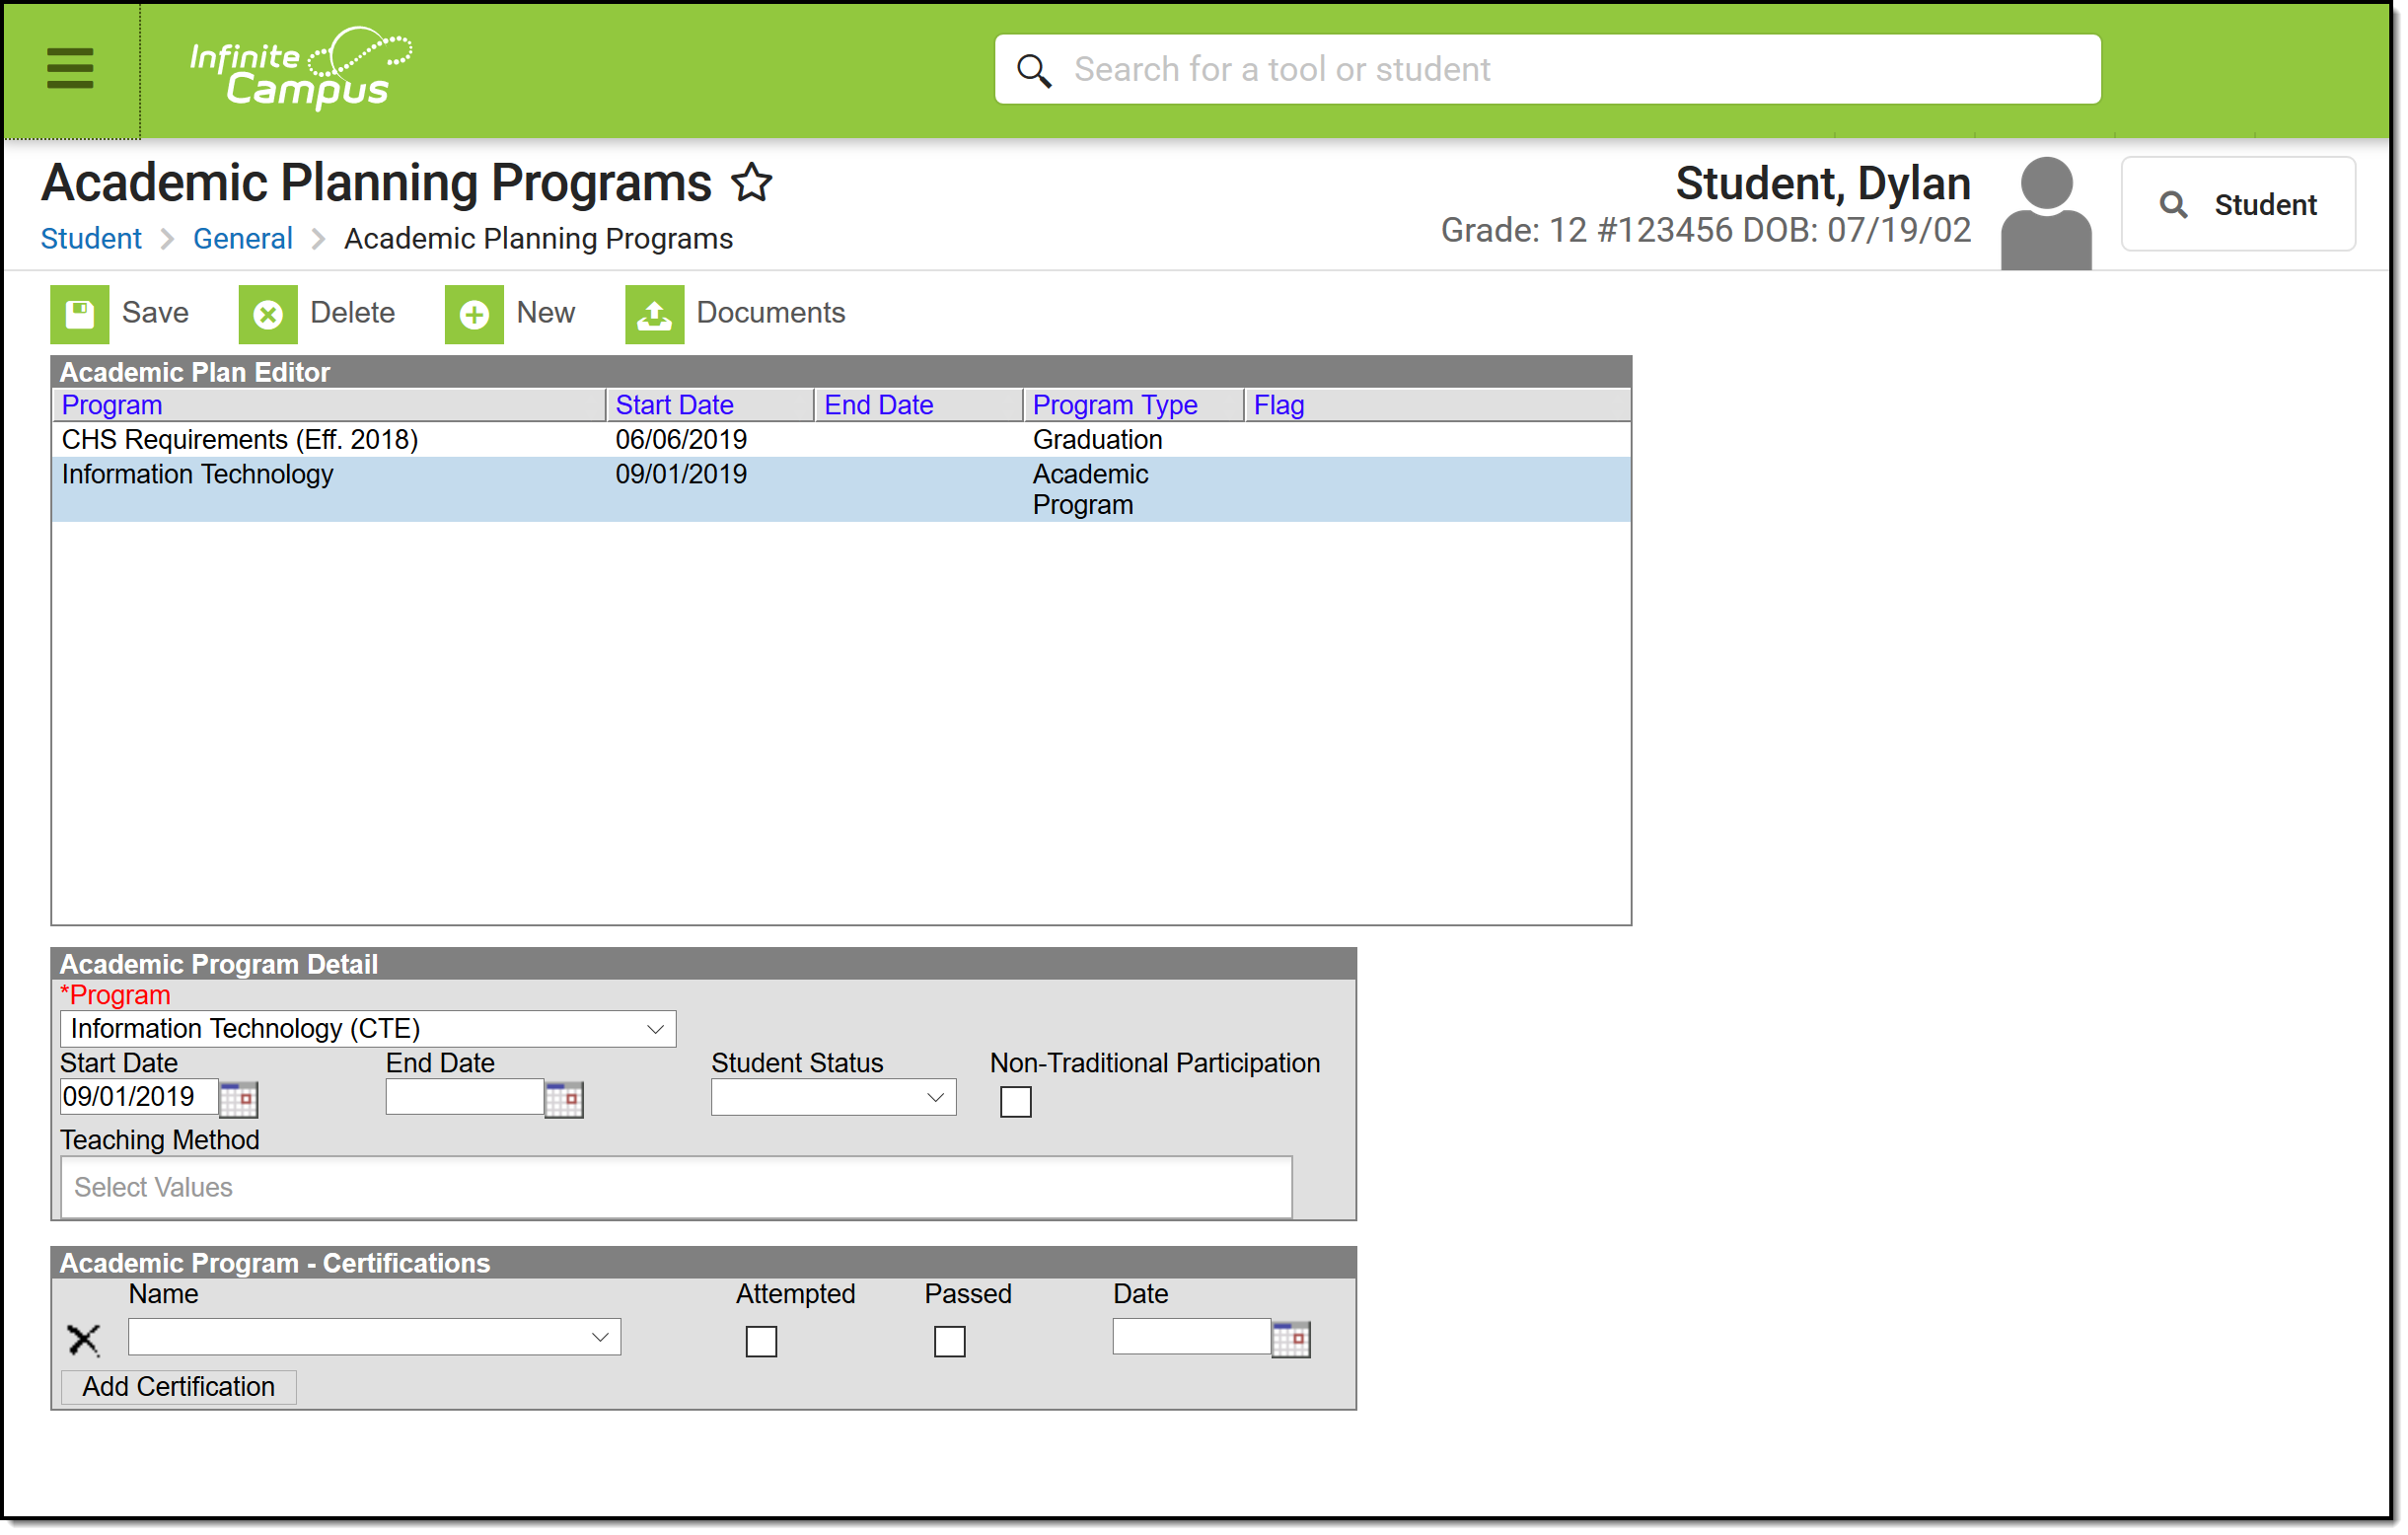 Screenshot of the Academic Planning Programs Academic Plan Editor and Academic Program Detail for a selected student's record.